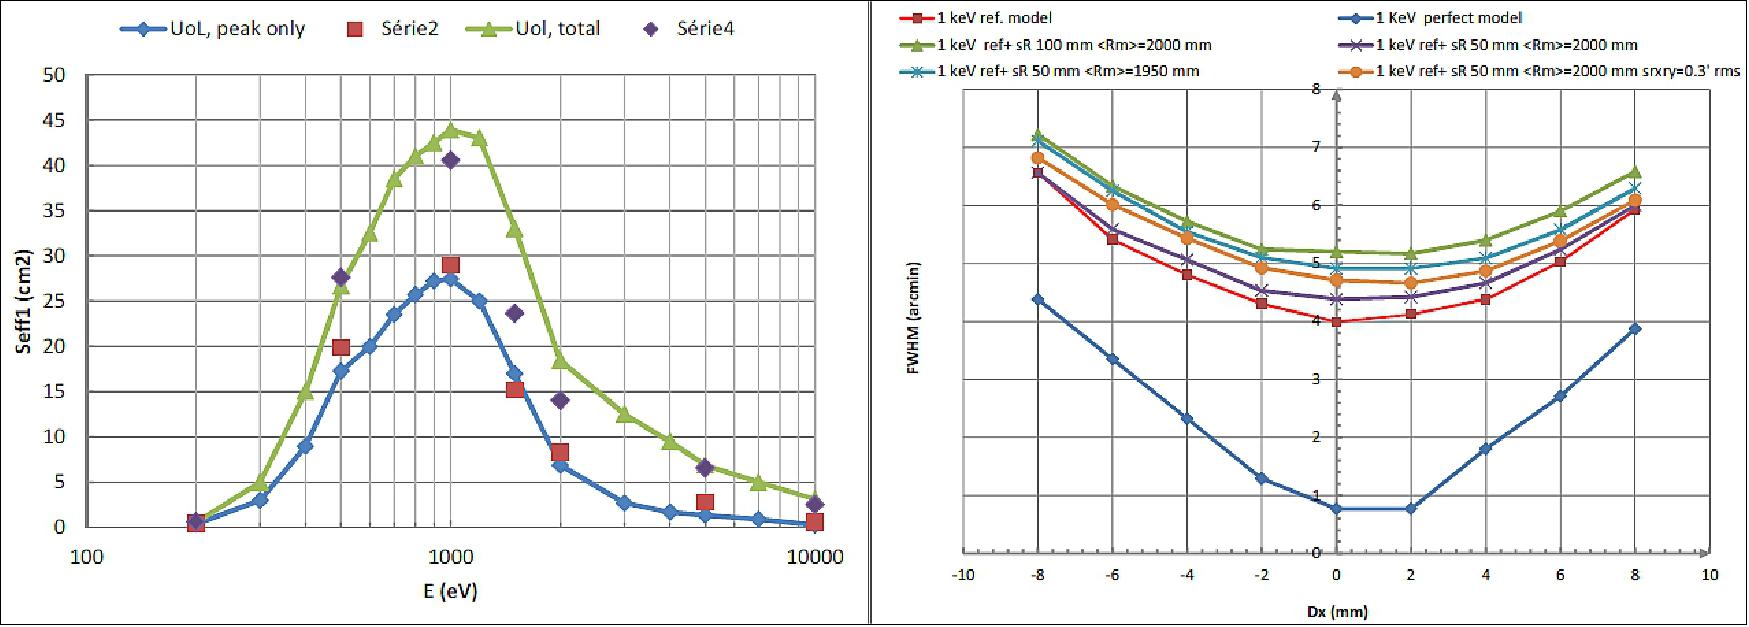 Figure 26: Left: Simulated effective area of the instrument for θh=0.3, θaf=0.75 arcmin rms. In green, total effective area, in blue, central spot only. Red squares and purple diamonds are the Zemax simulation. Right: impacts of assembly errors on the defocus curve. The reference model is with θh=0.3º, θaf=0.75 arcmin rms. sR is the standard deviation of the MPO radius, <Rm> is its averaged value. srxry is the standard deviation of the tip/tilt error of the MPO mounted on the frame (image credit: CNES, CEA)